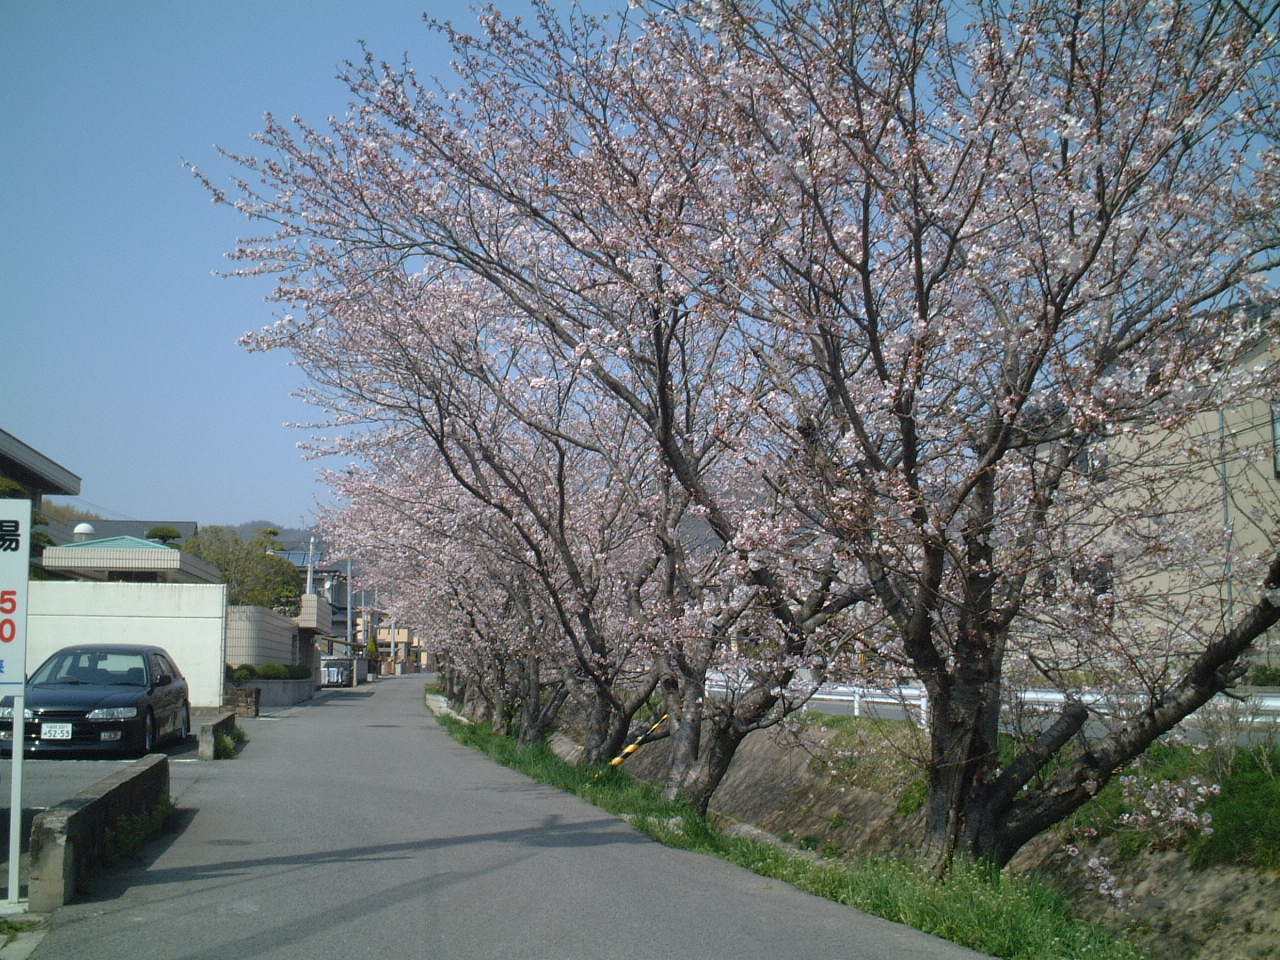 View. Cherry trees are in full bloom in the spring